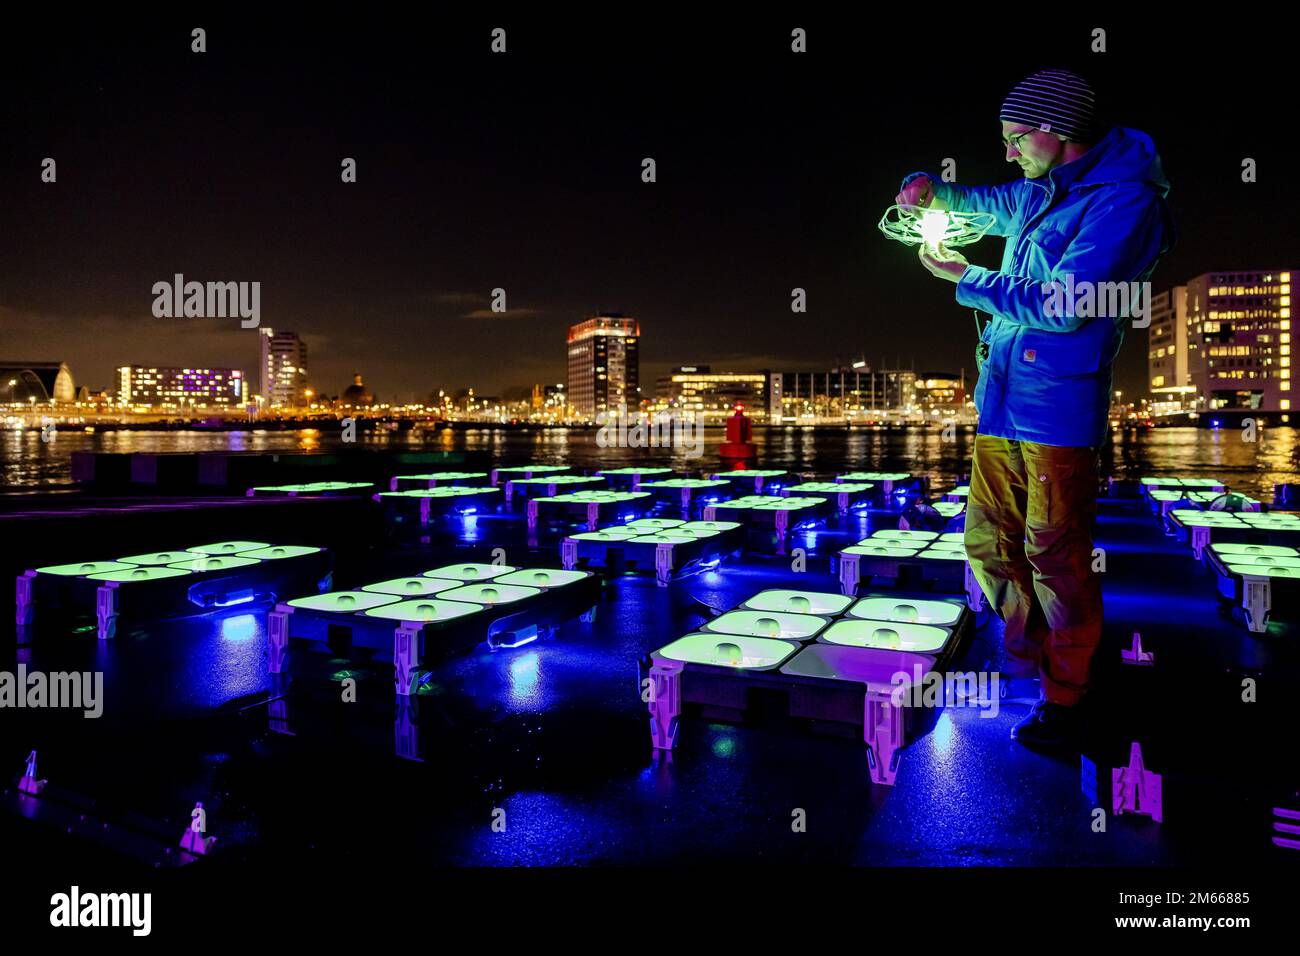 AMSTERDAM - Employees prepare drones for a show with drones and fireworks around the A'DAM Tower, two days after New Year's Eve. The show with six hundred drones was supposed to be held in Amsterdam North on Saturday evening, but was canceled due to bad weather. The municipality of Amsterdam wants to start a new tradition with professional shows for the turn of the year, with less damage, violence and nuisance. ANP ROBIN VAN LONKHUIJSEN netherlands out - belgium out Stock Photo